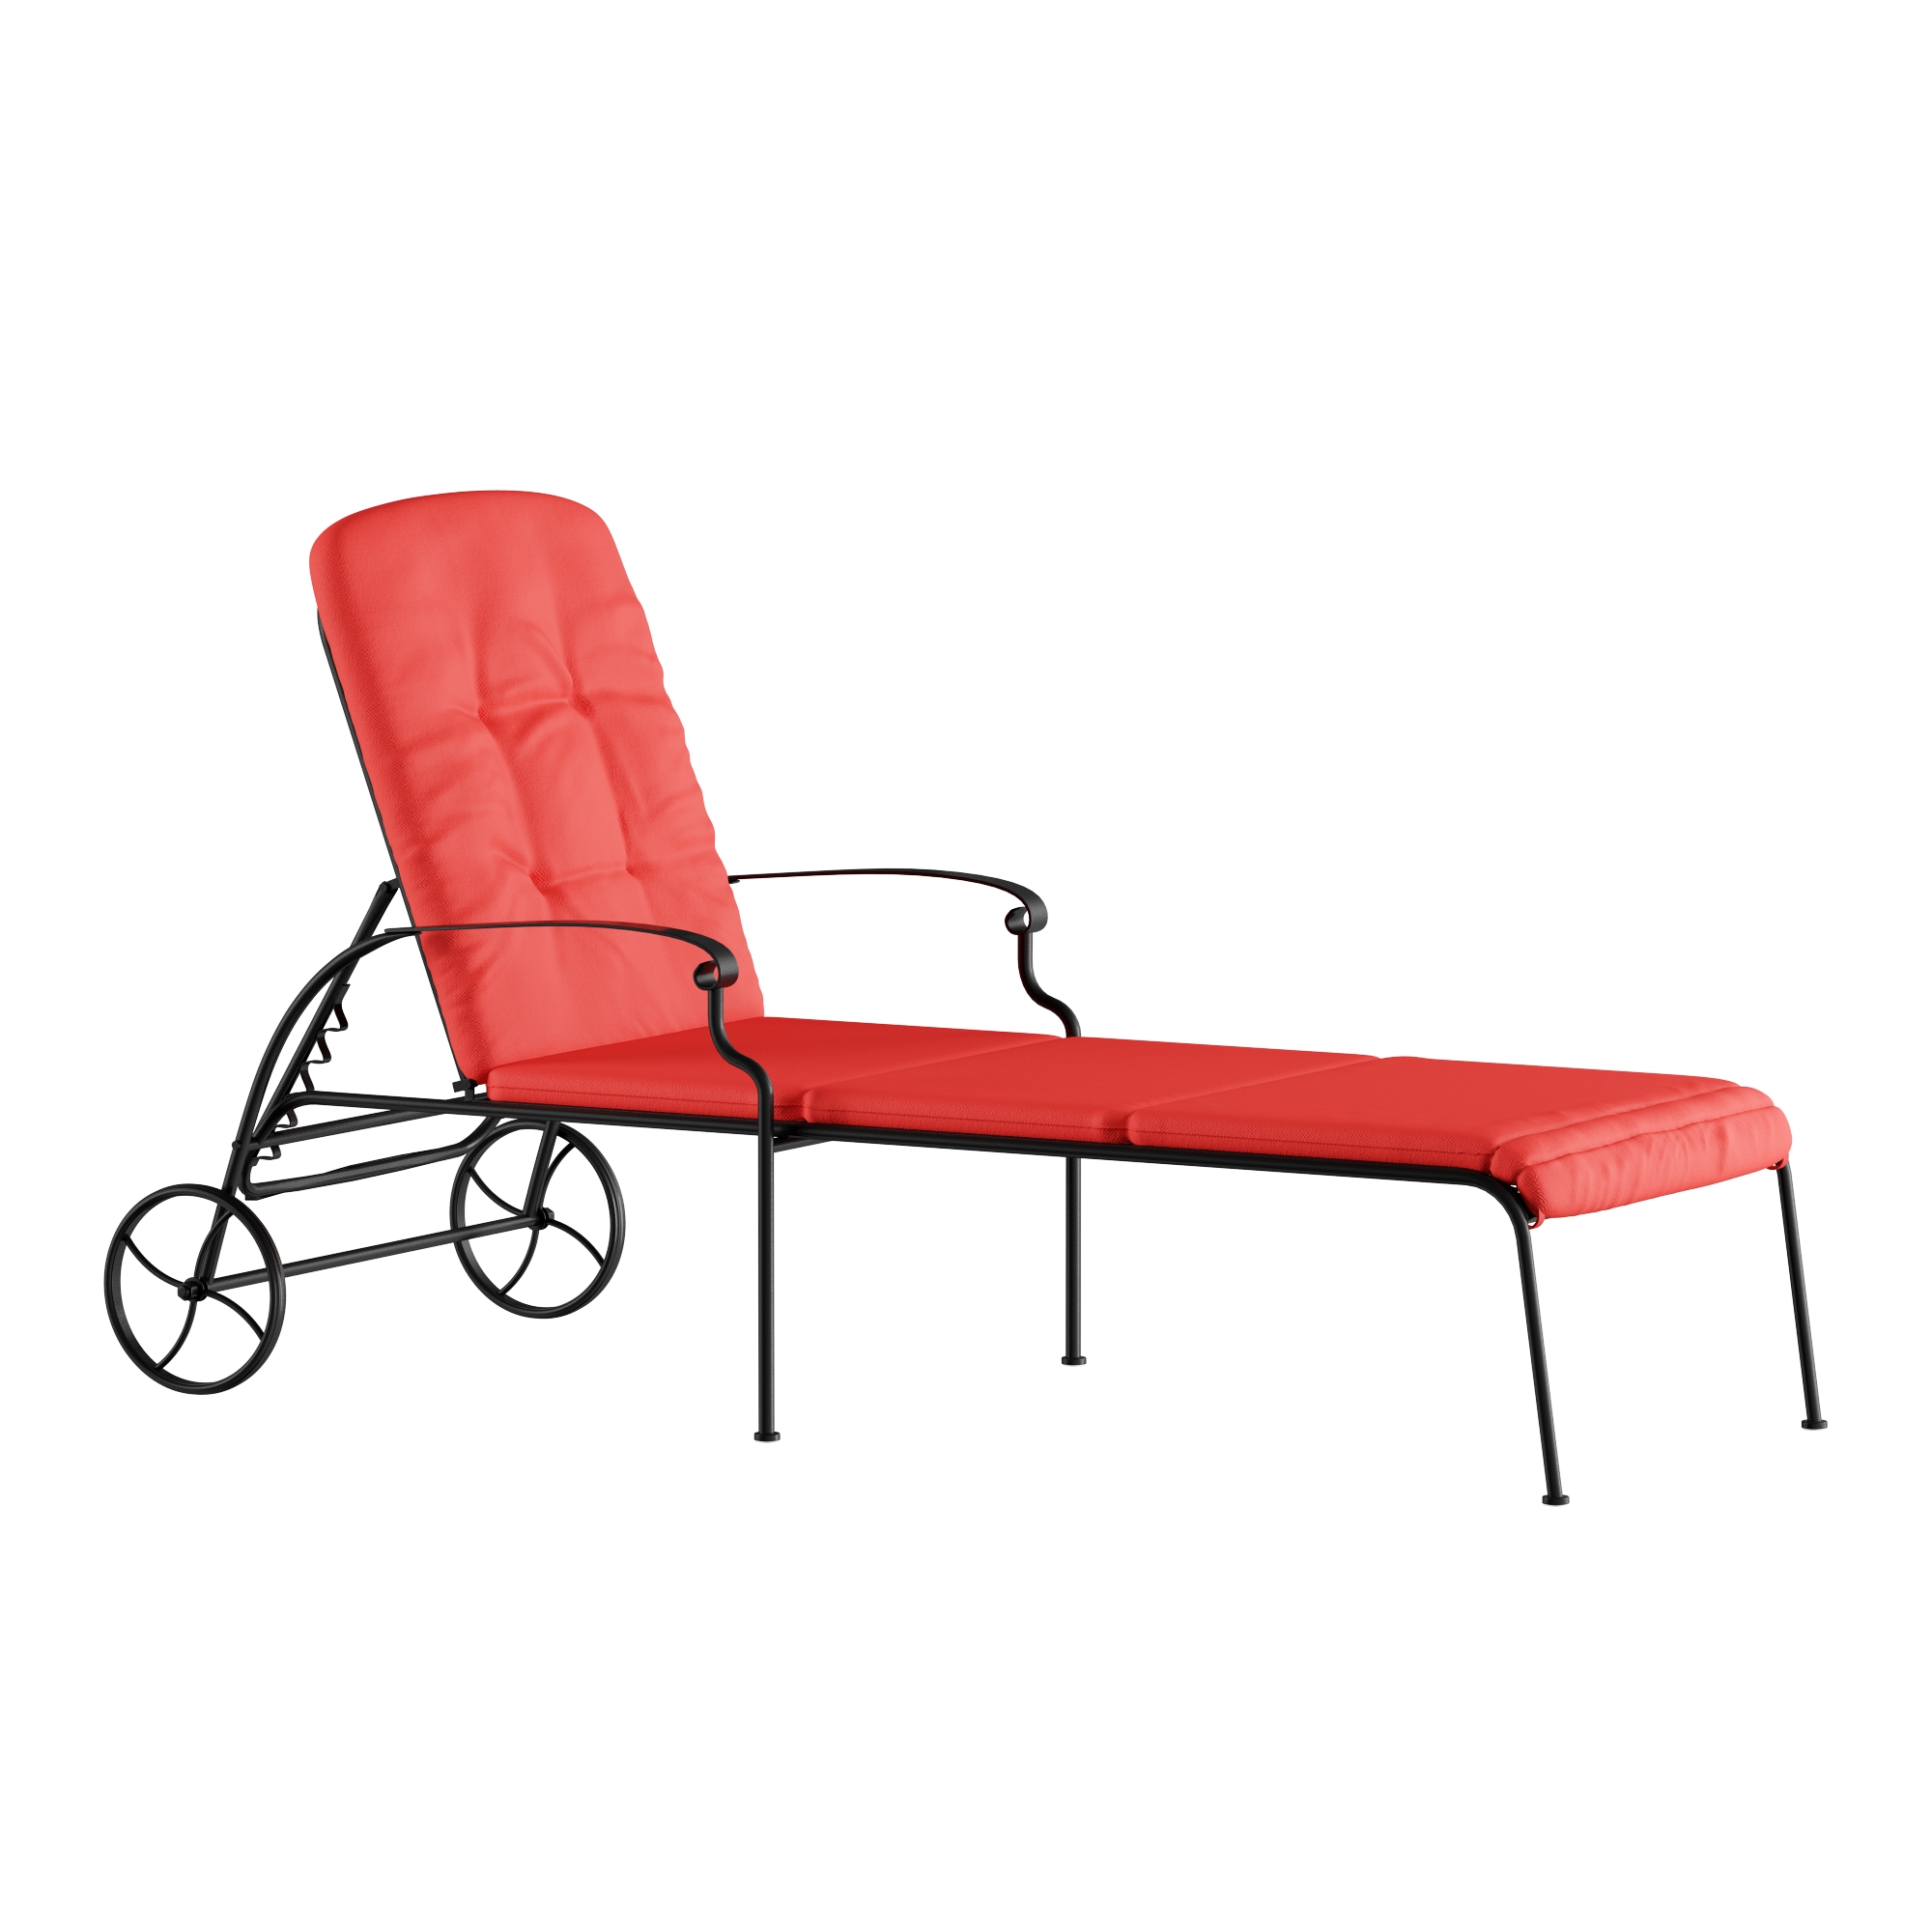 Better Homes Gardens Clayton Court Chaise Lounge With Wheels Red Walmart Com Walmart Com